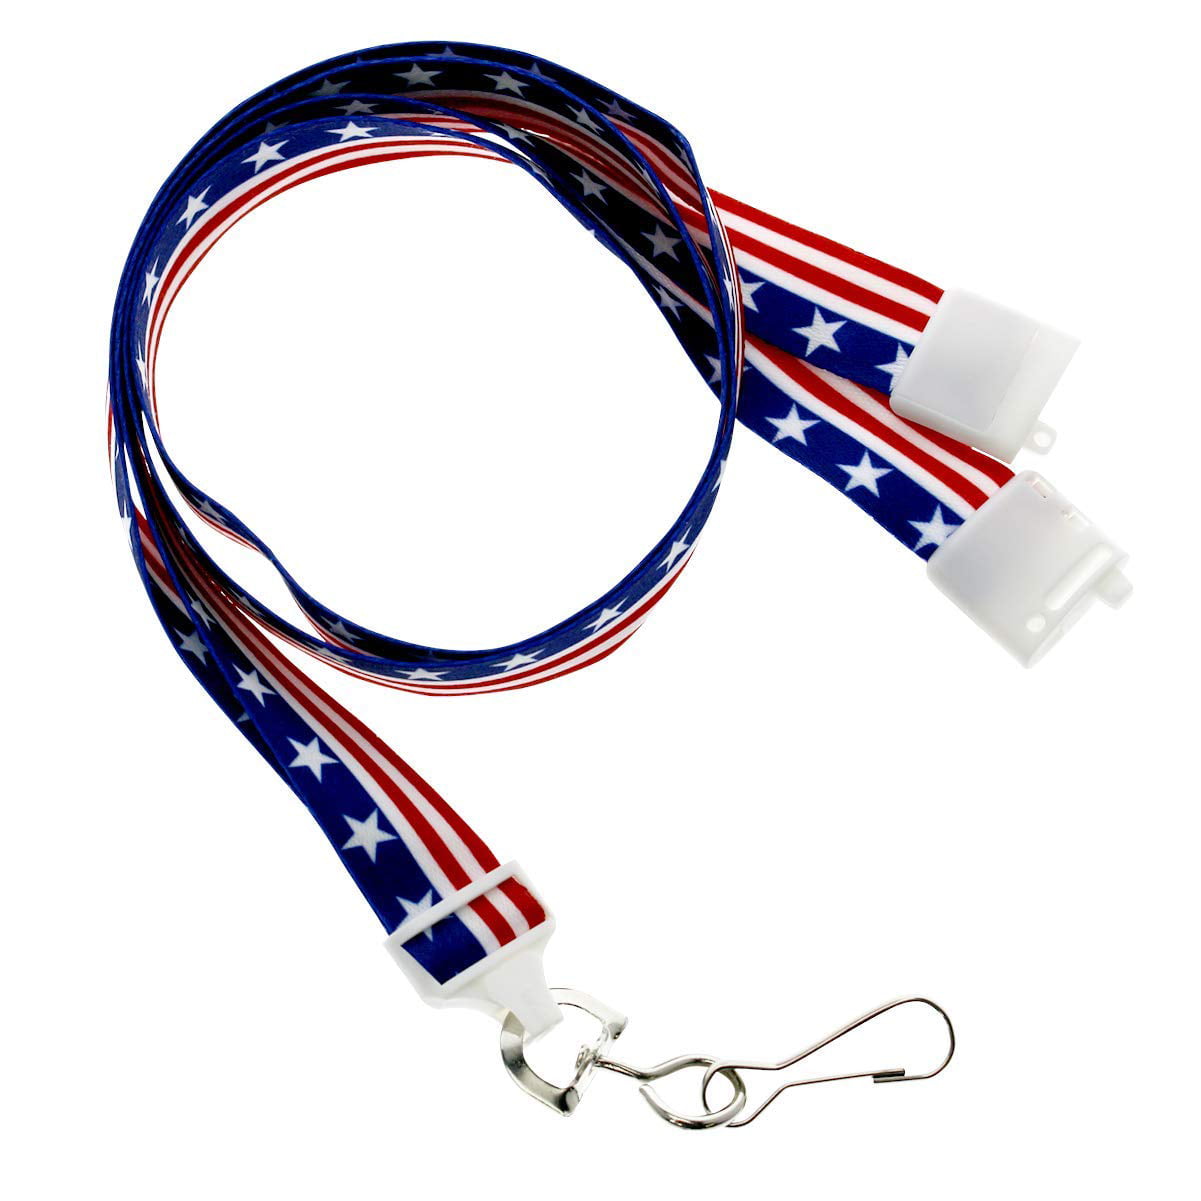 100 pc Patriotic American Flag USA ID Lanyards Red White & Blue with Breakaway 